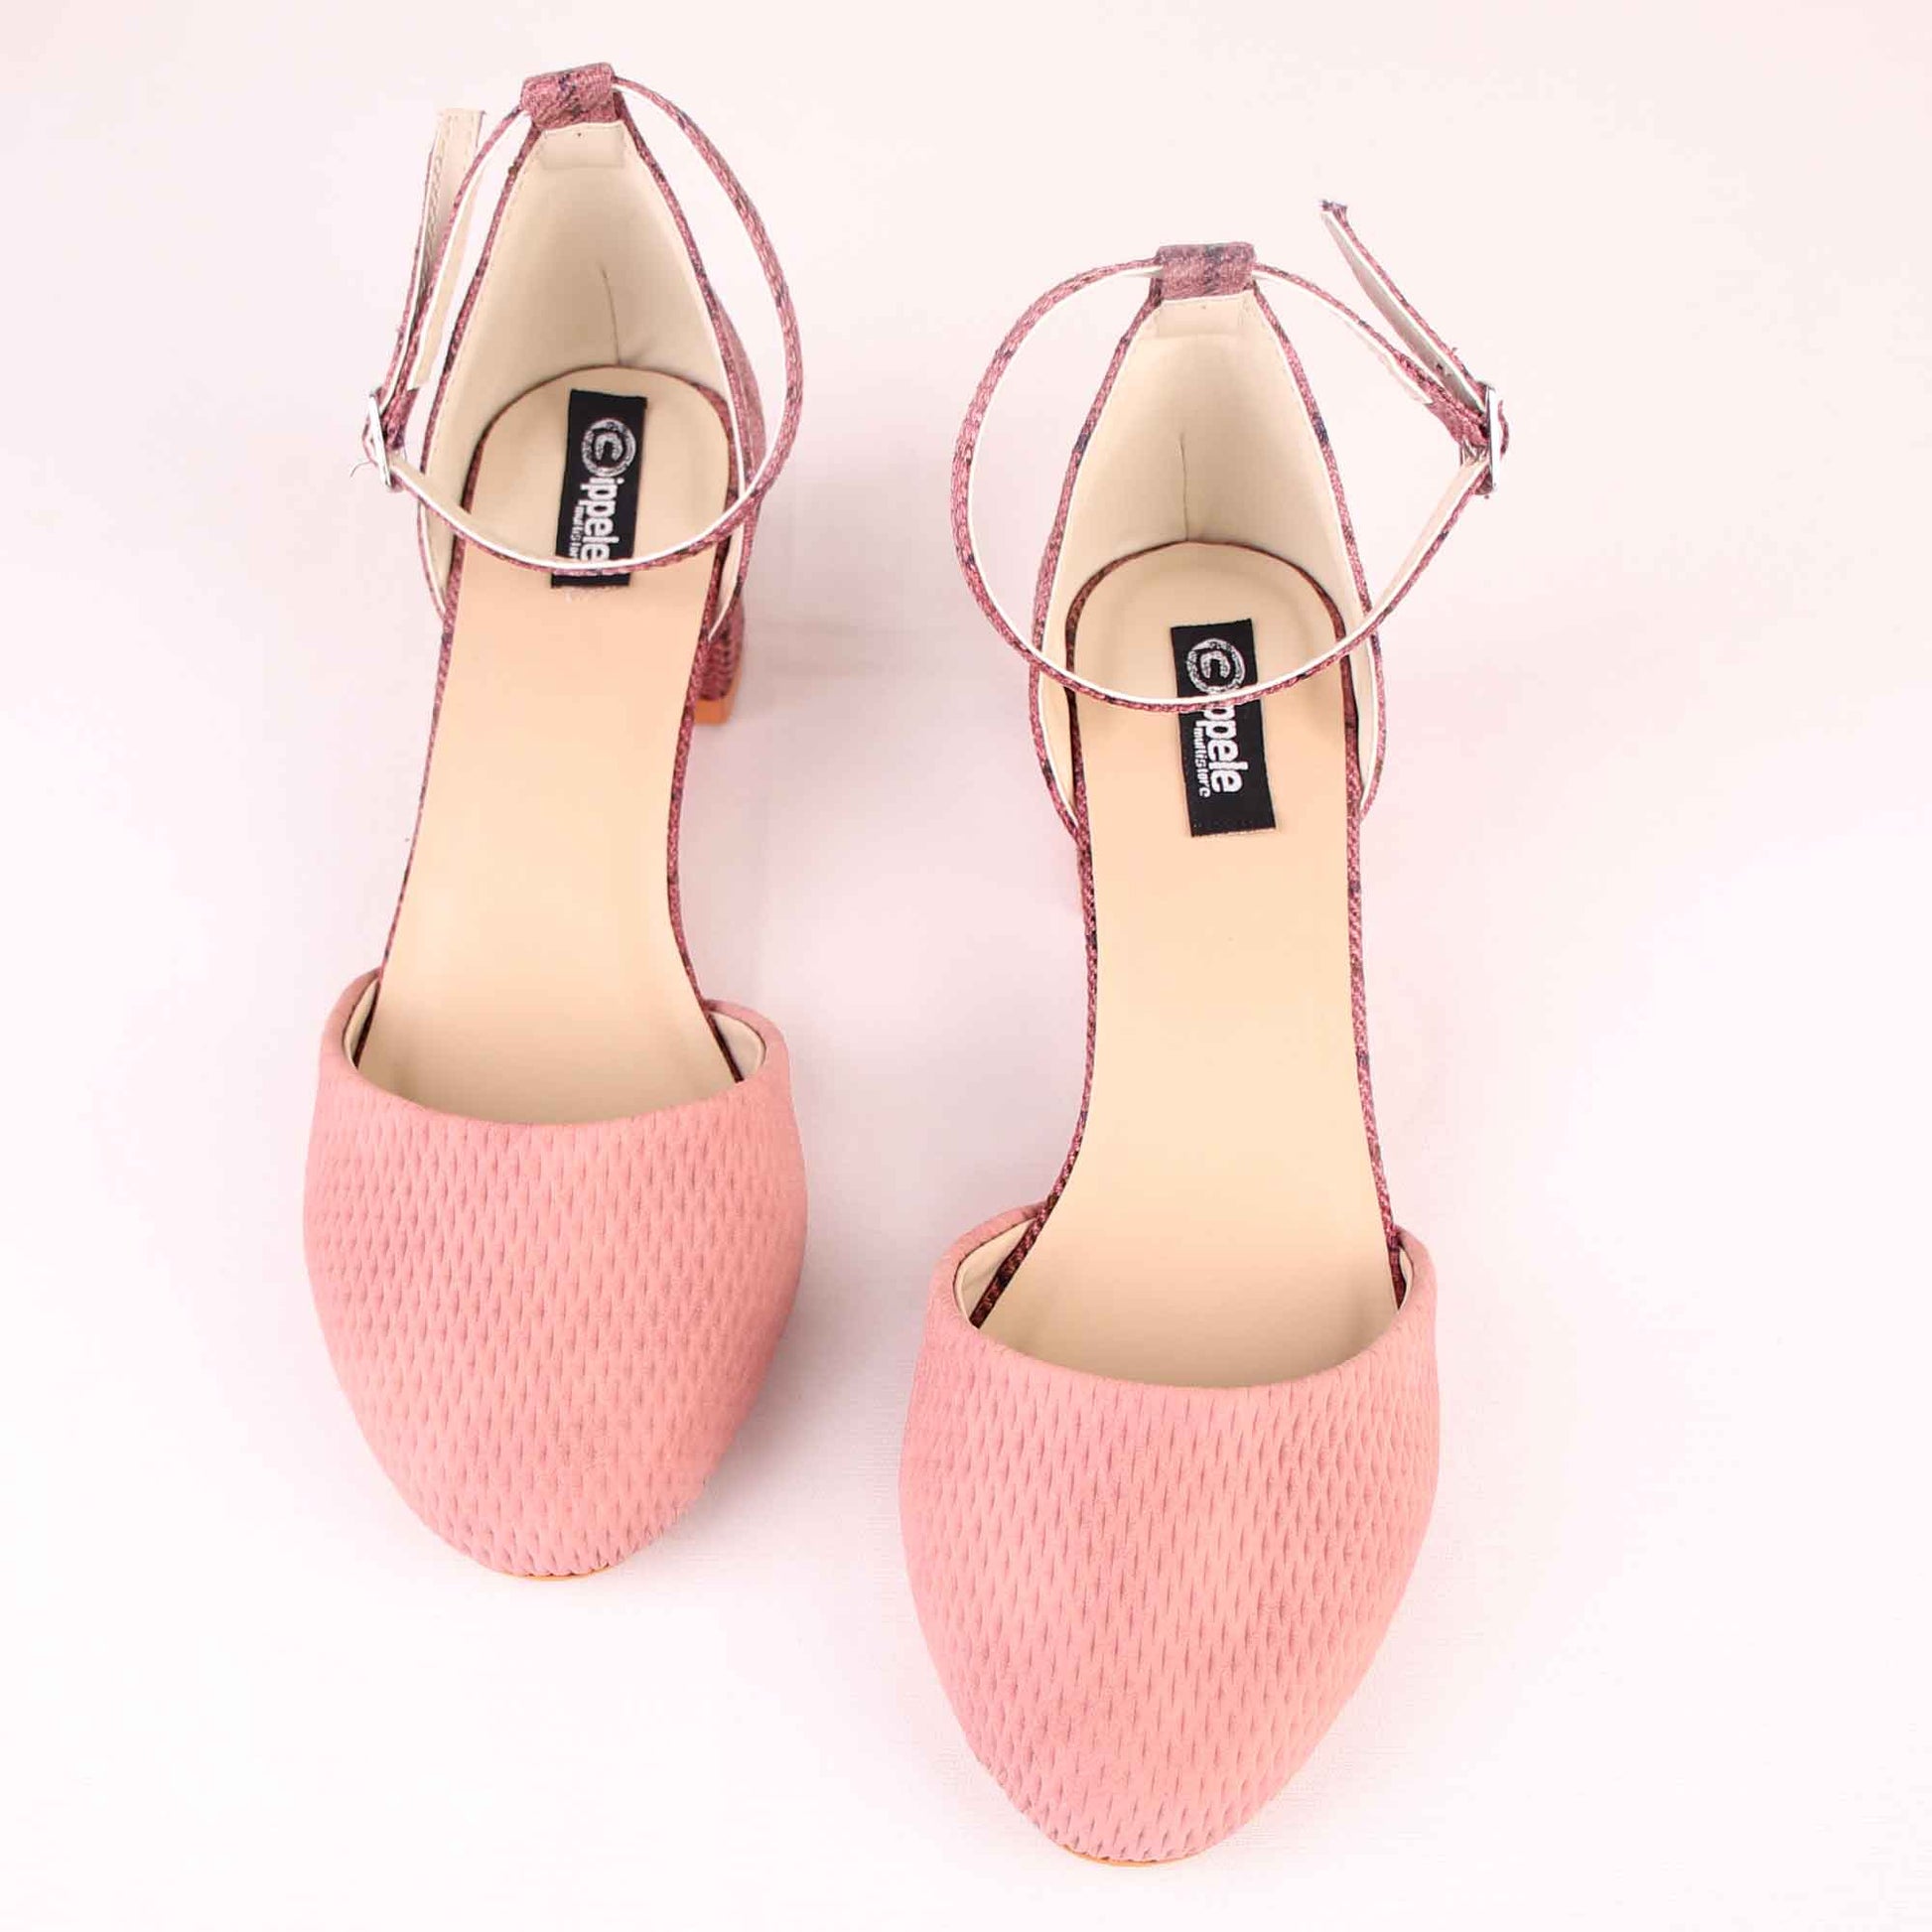 Foot Wear,The Interweave Checked Pink Block Heels - Cippele Multi Store